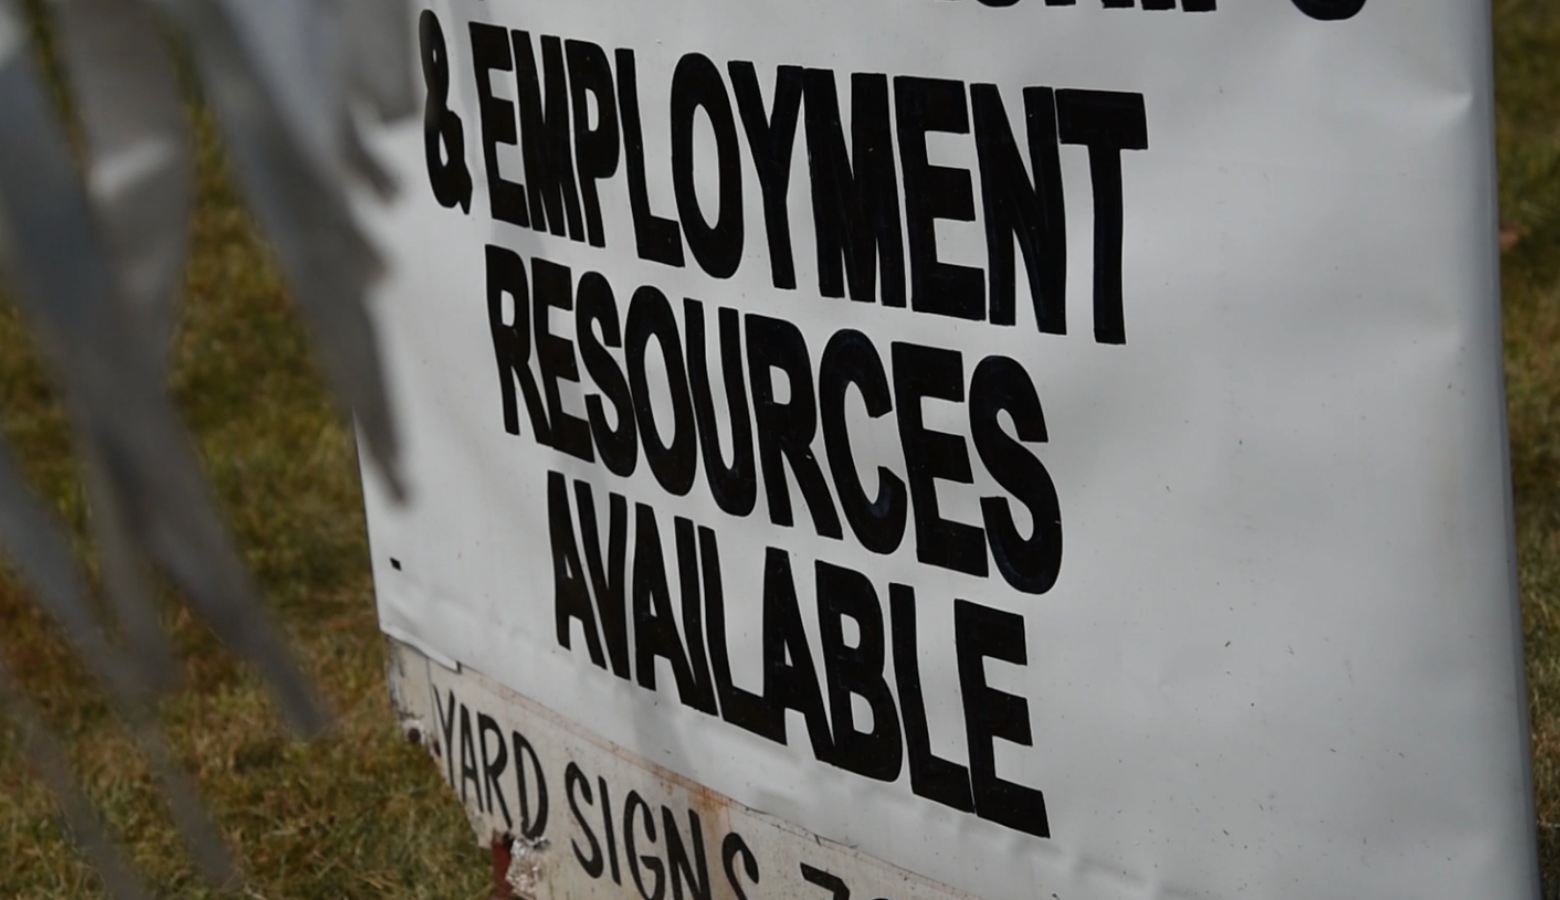 A sign outside Nu Corinthian Baptist Church in Indianapolis advertises employment resources at a weekly food handout during the pandemic. (Justin Hicks / IPB News)